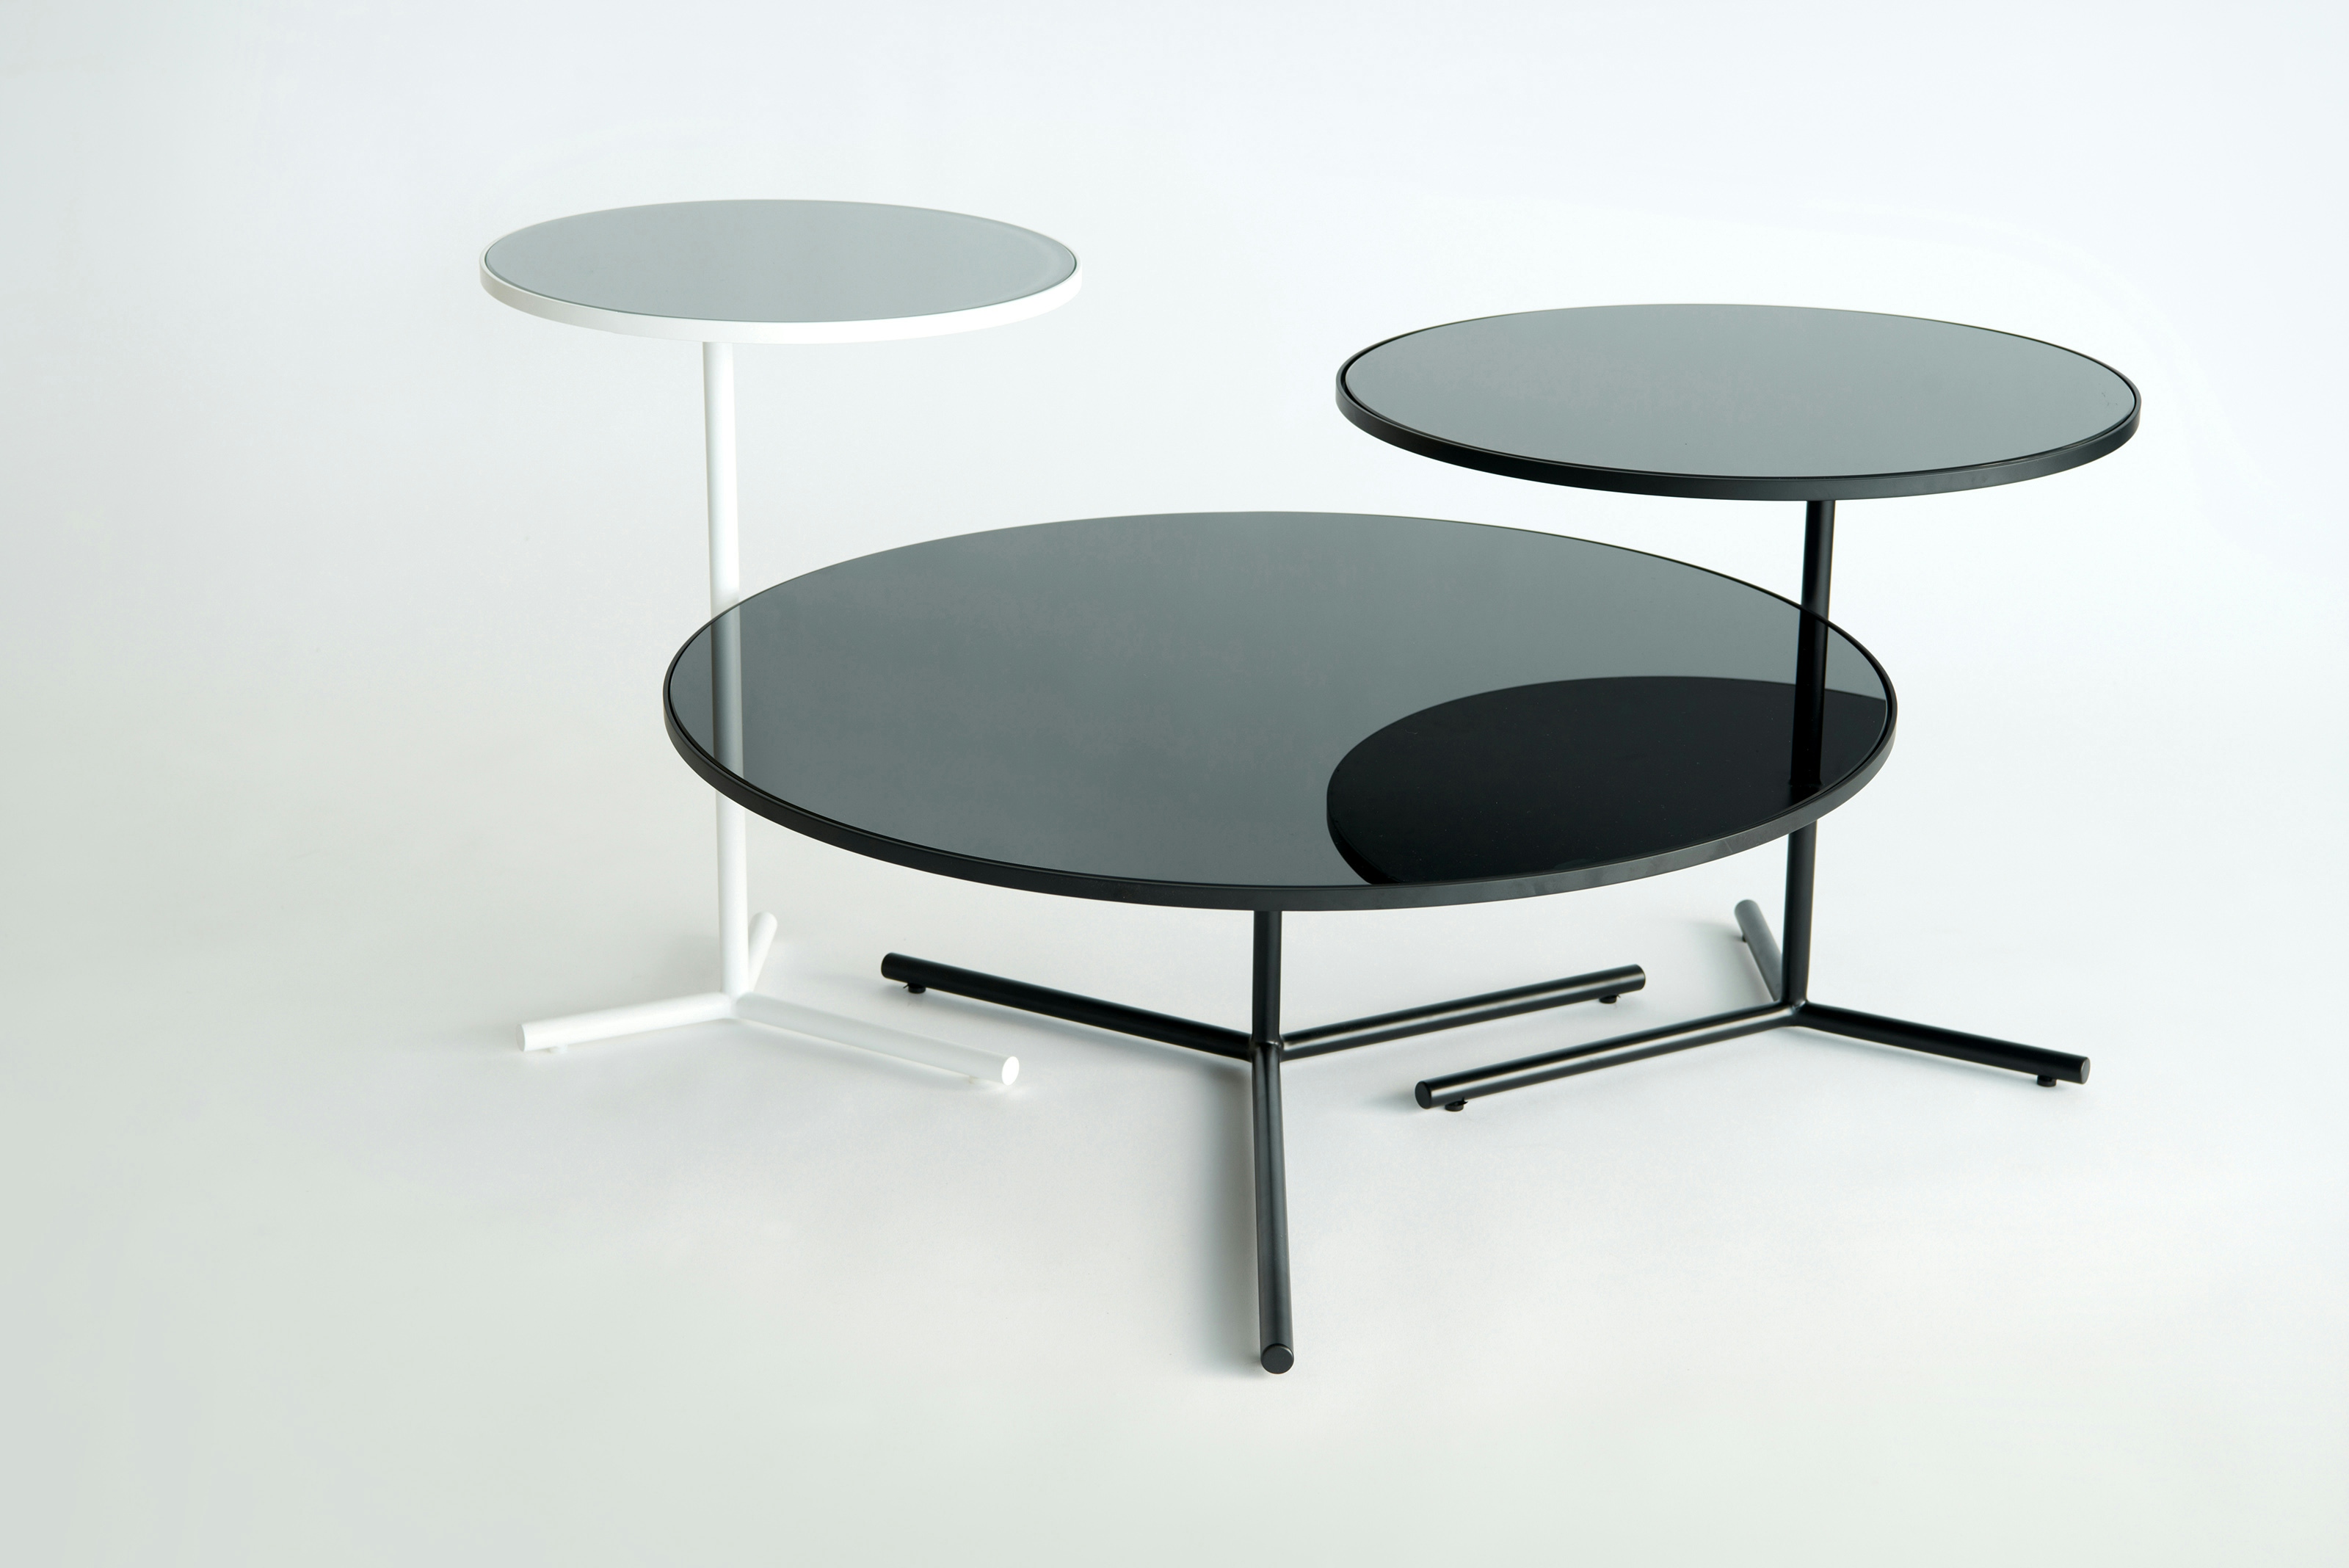 Phase Design Downtown Tables 10 Web